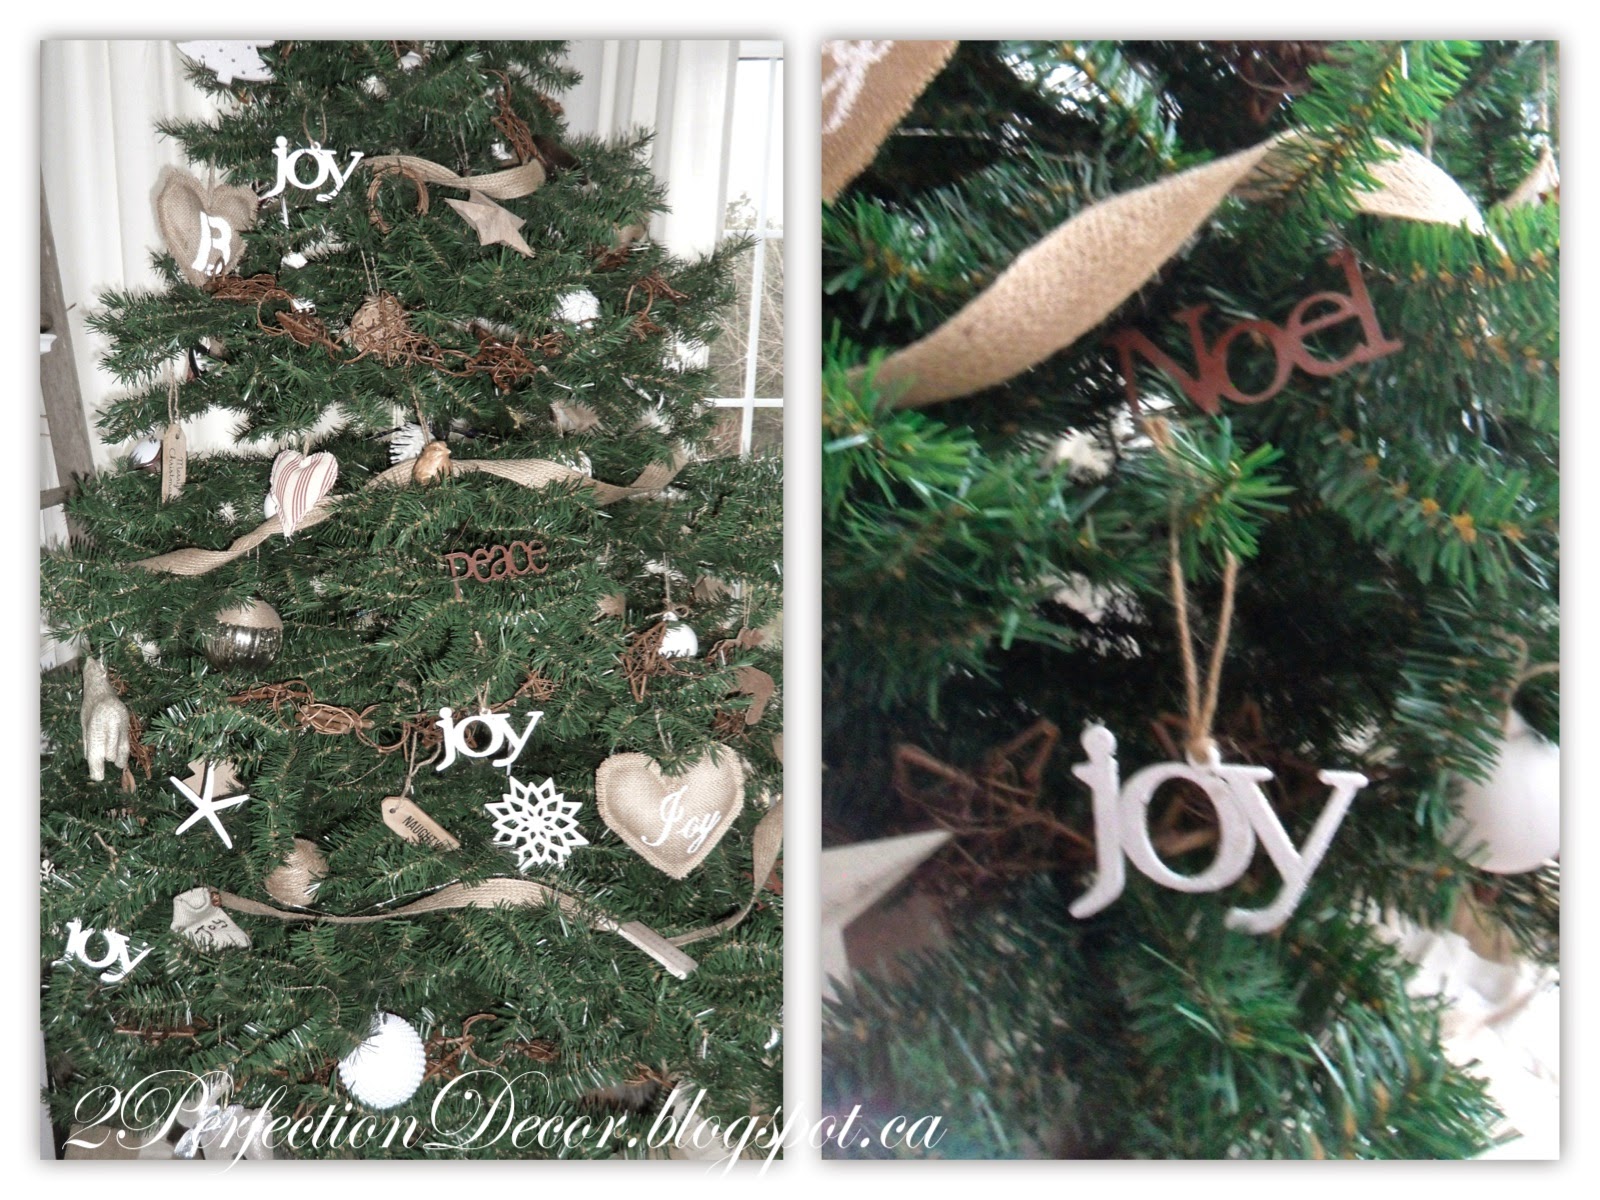 2Perfection Decor: JOY Dollar Store Ornaments with a simple twist.